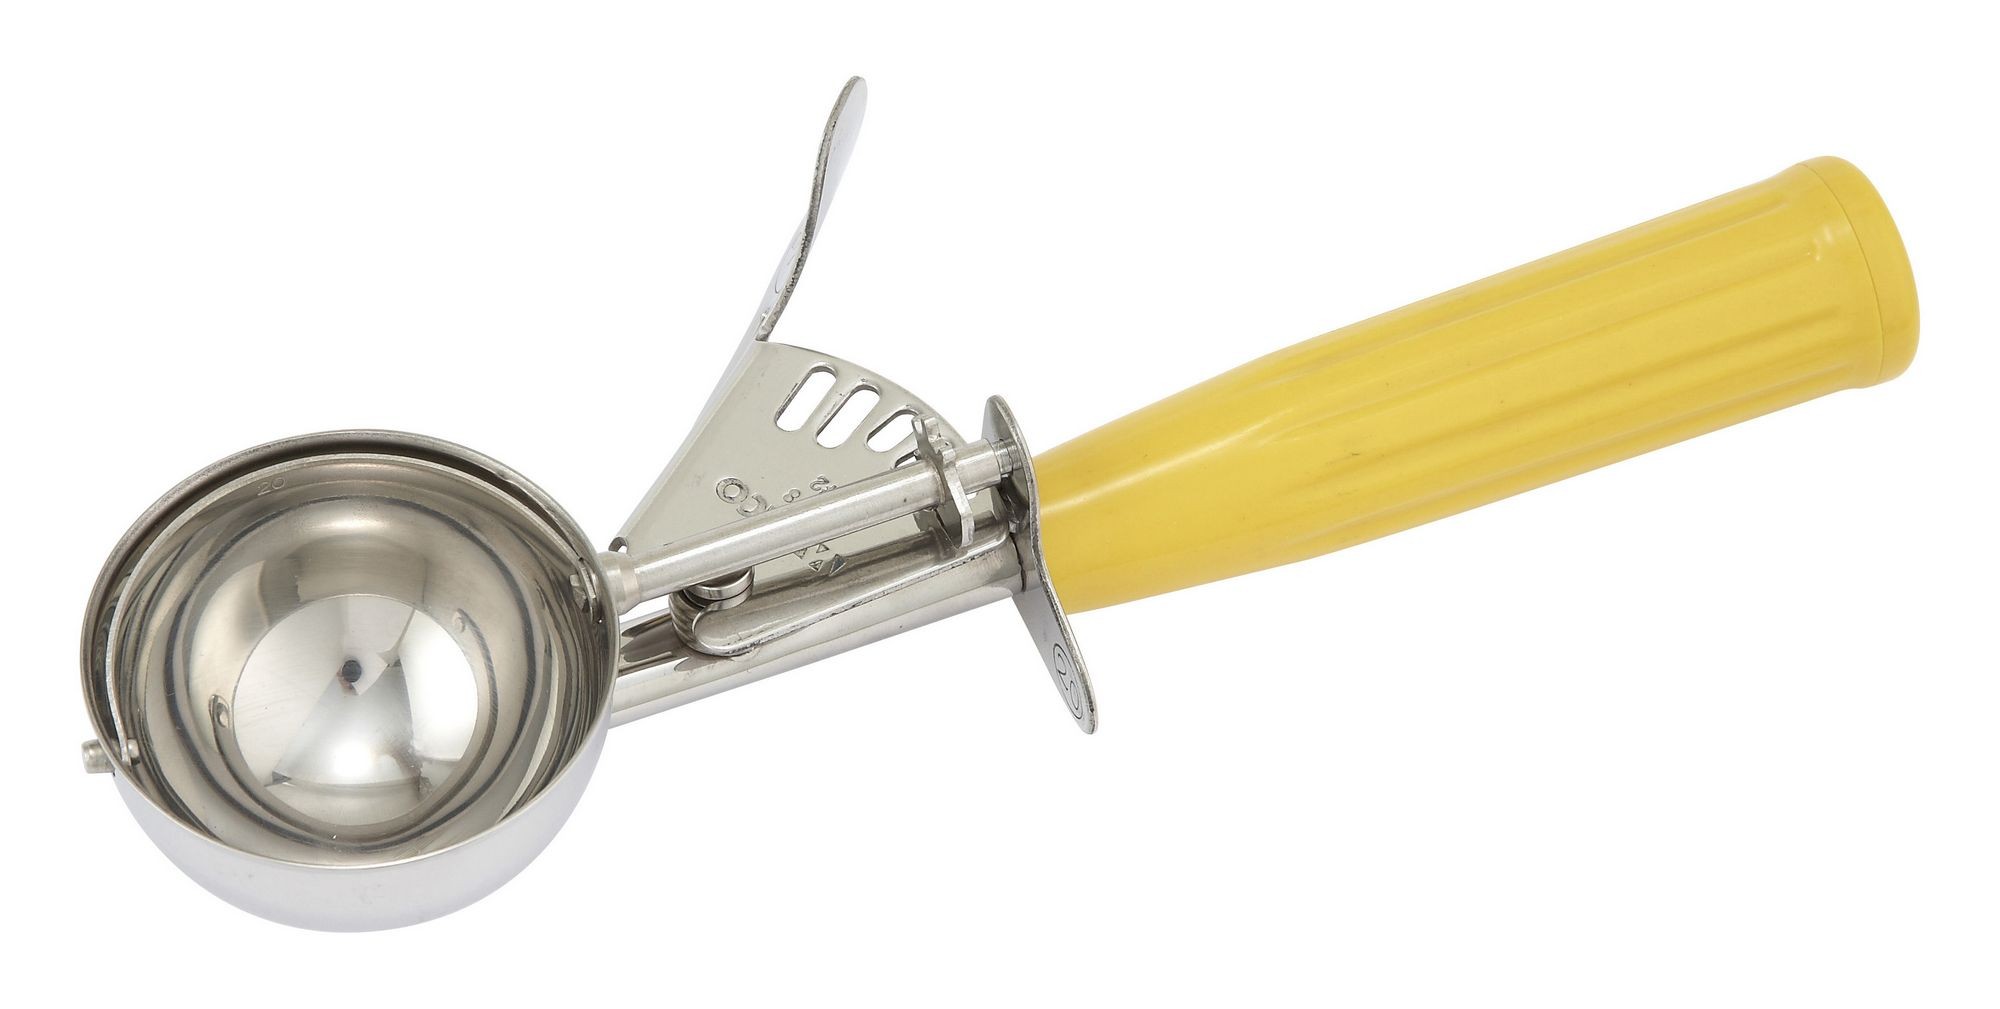 Winco ICD-20 Ice Cream Disher 2 oz. with Yellow Plastic Handle Size 20